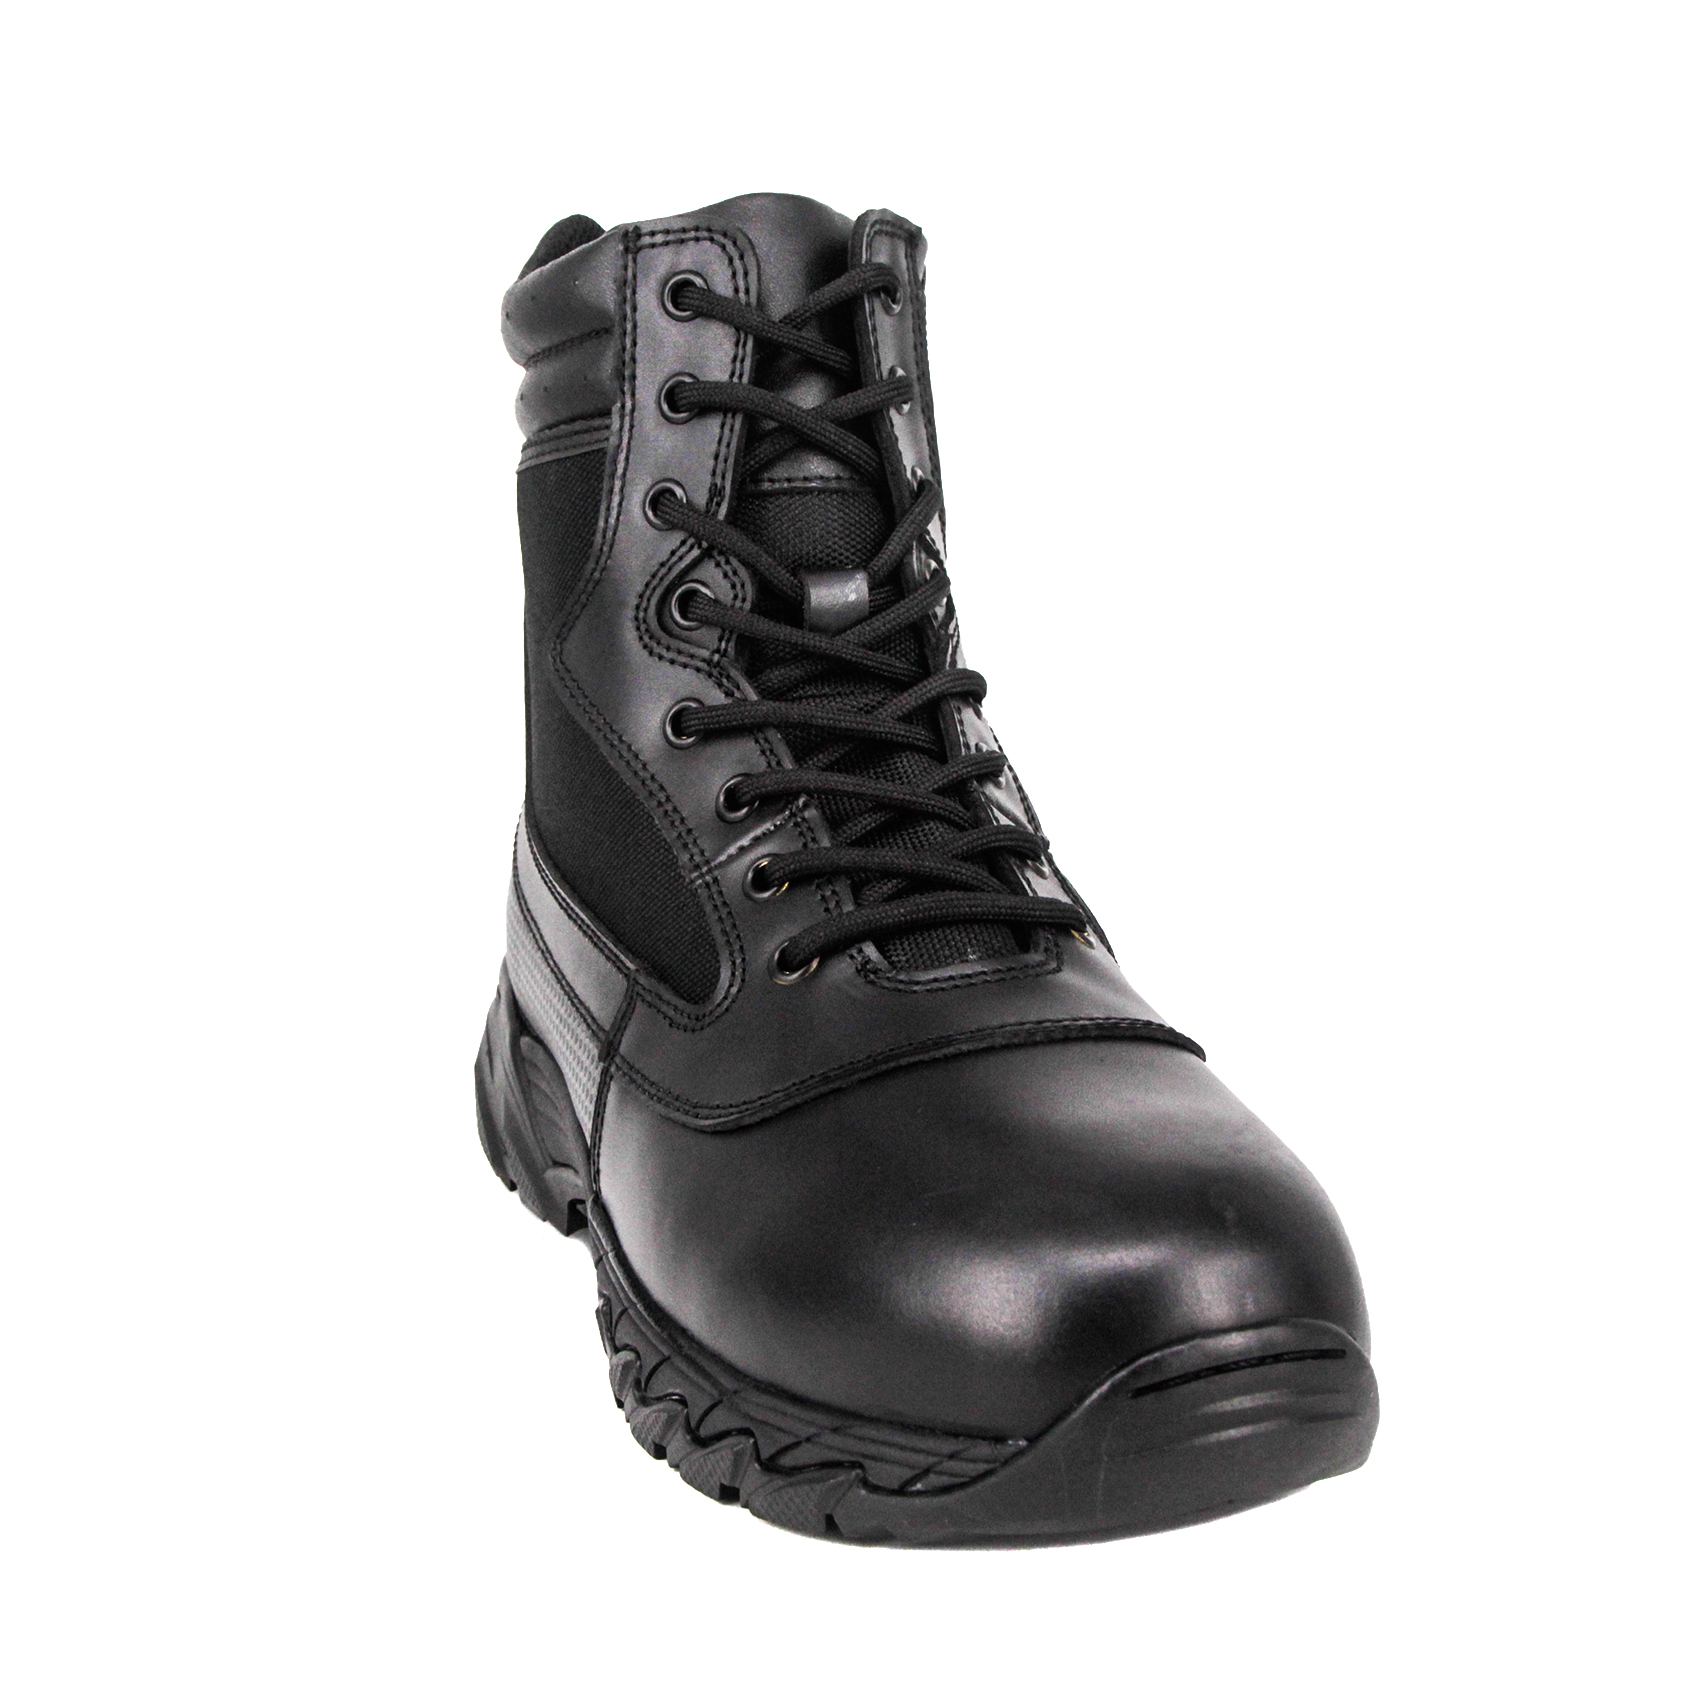 MILFORCE High Quality cheap Military police military work boots